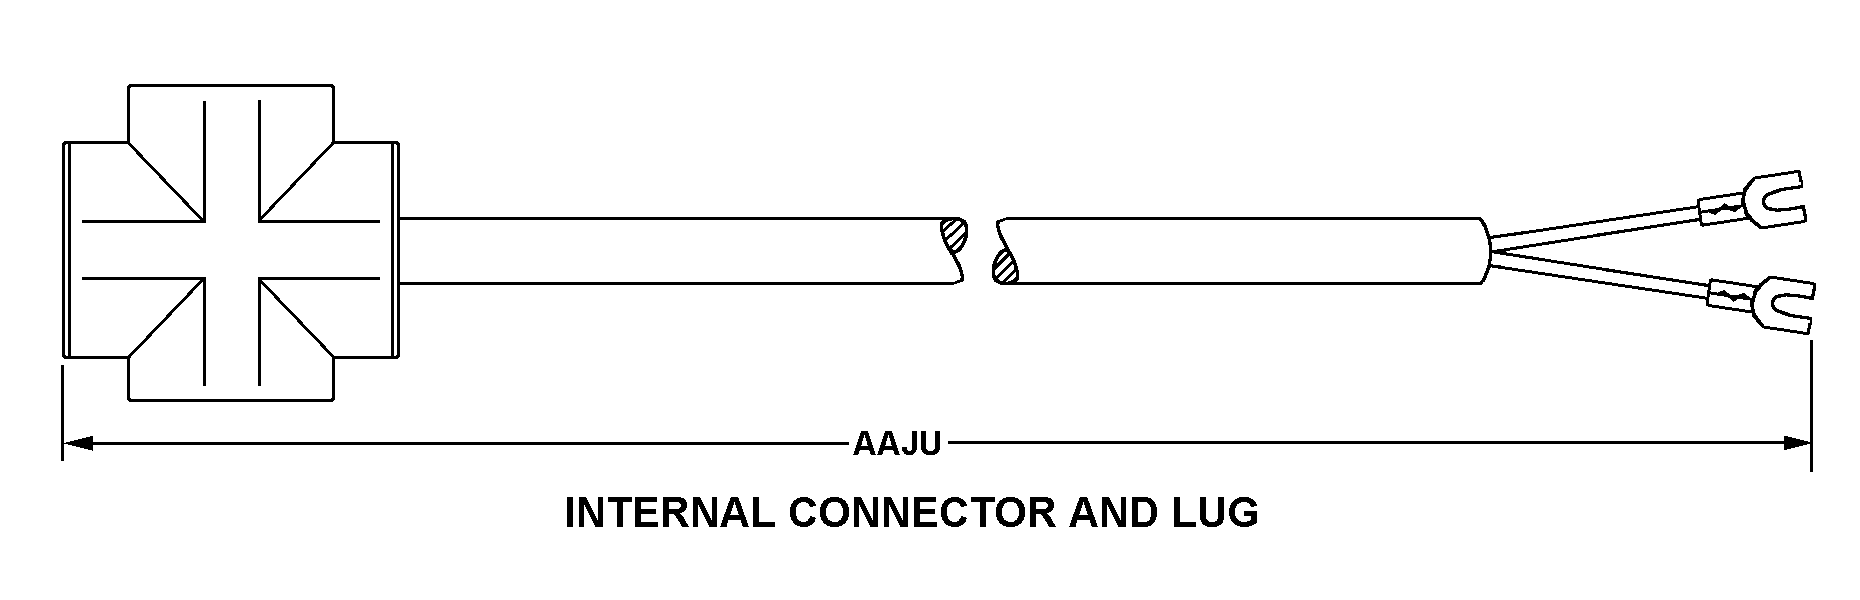 INTERNAL CONNECTOR AND LUG style nsn 6150-00-945-3185